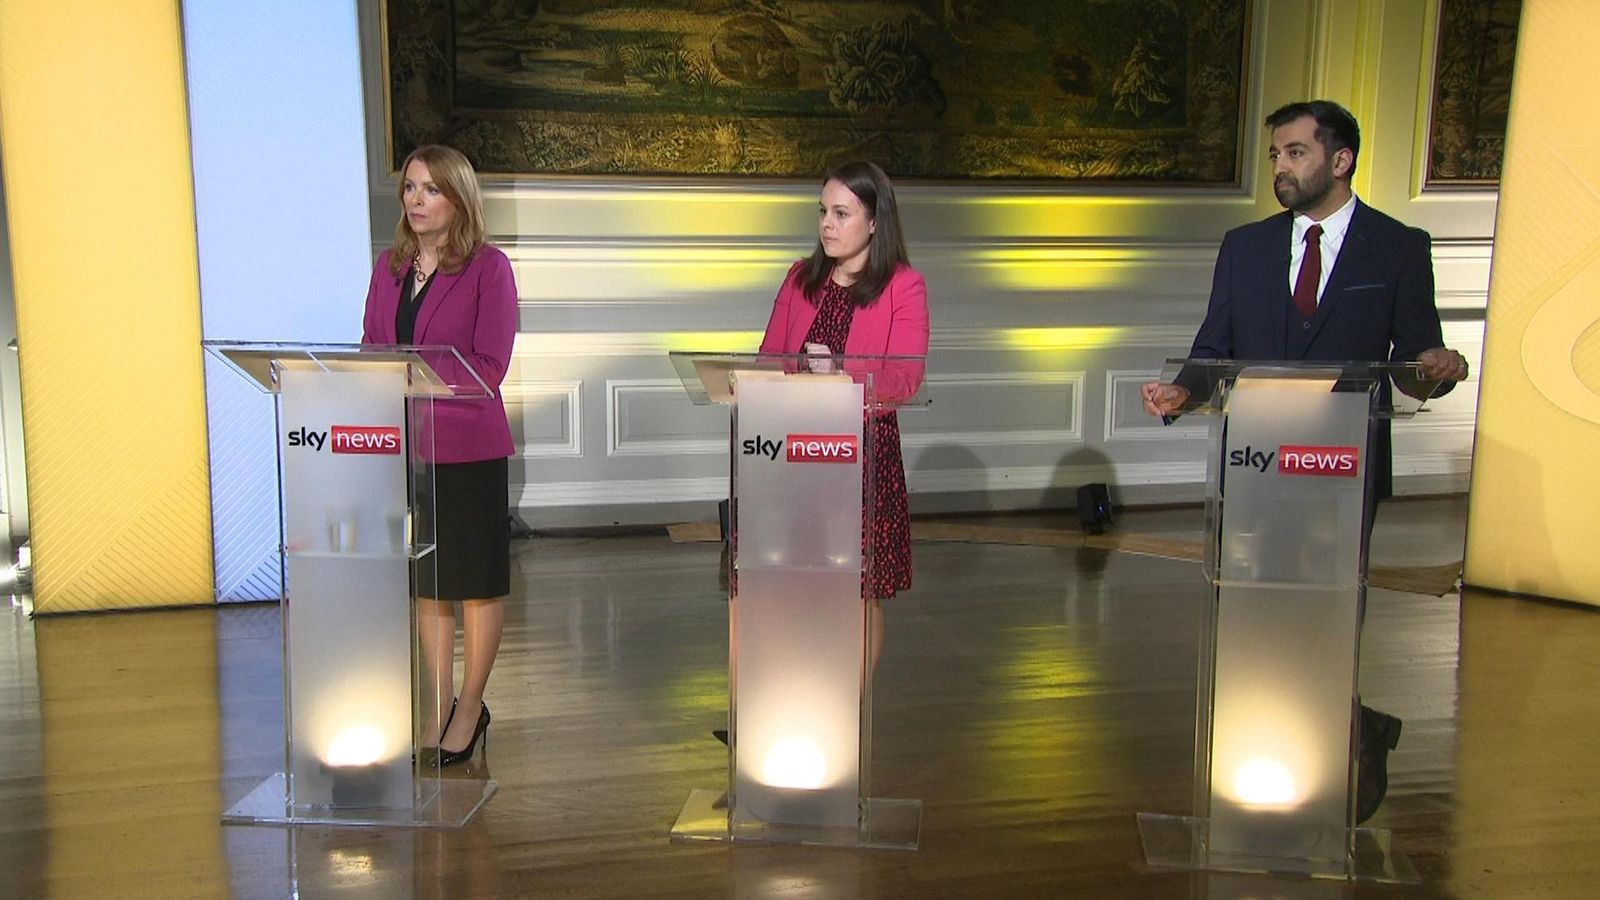 SNP leadership campaign: Independence and poll woes - key moments of fiery Sky News debate